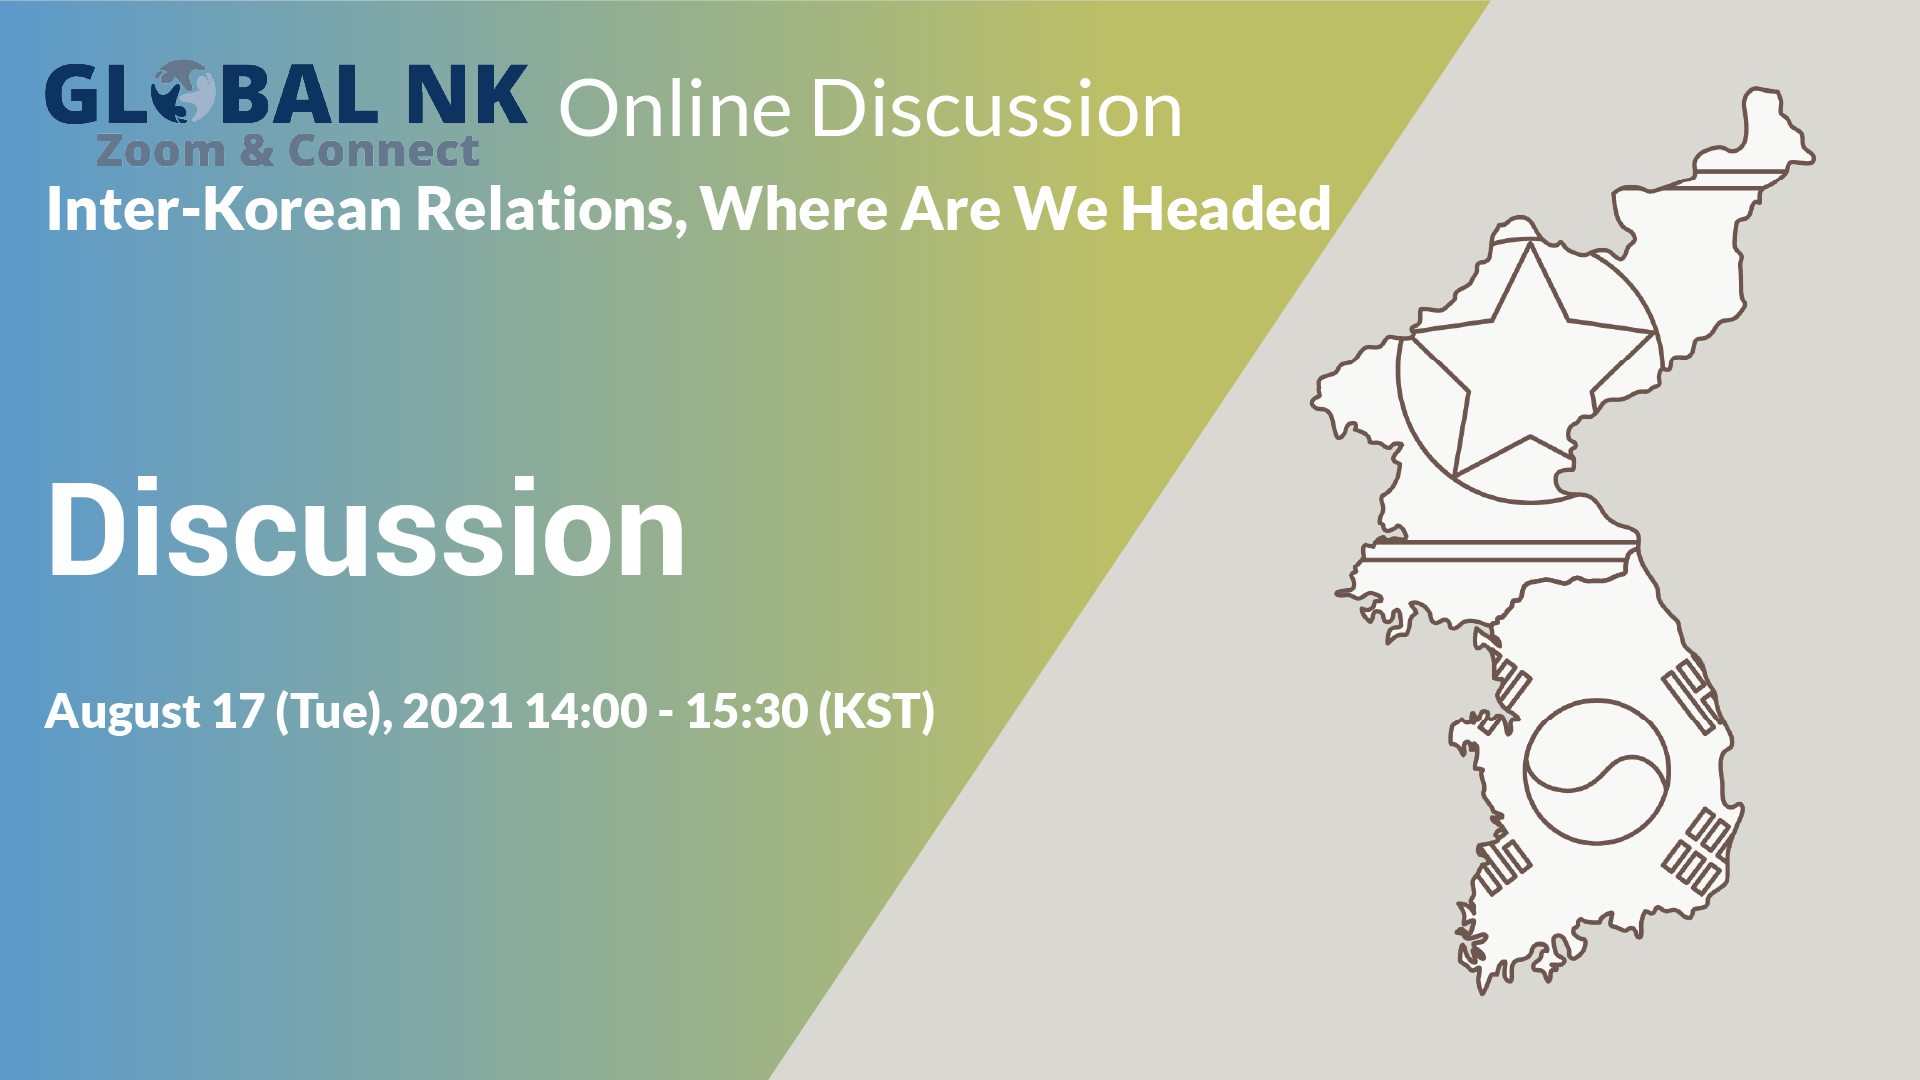 [Global NK Online Discussion] Inter-Korean Relations, Where Are We Headed